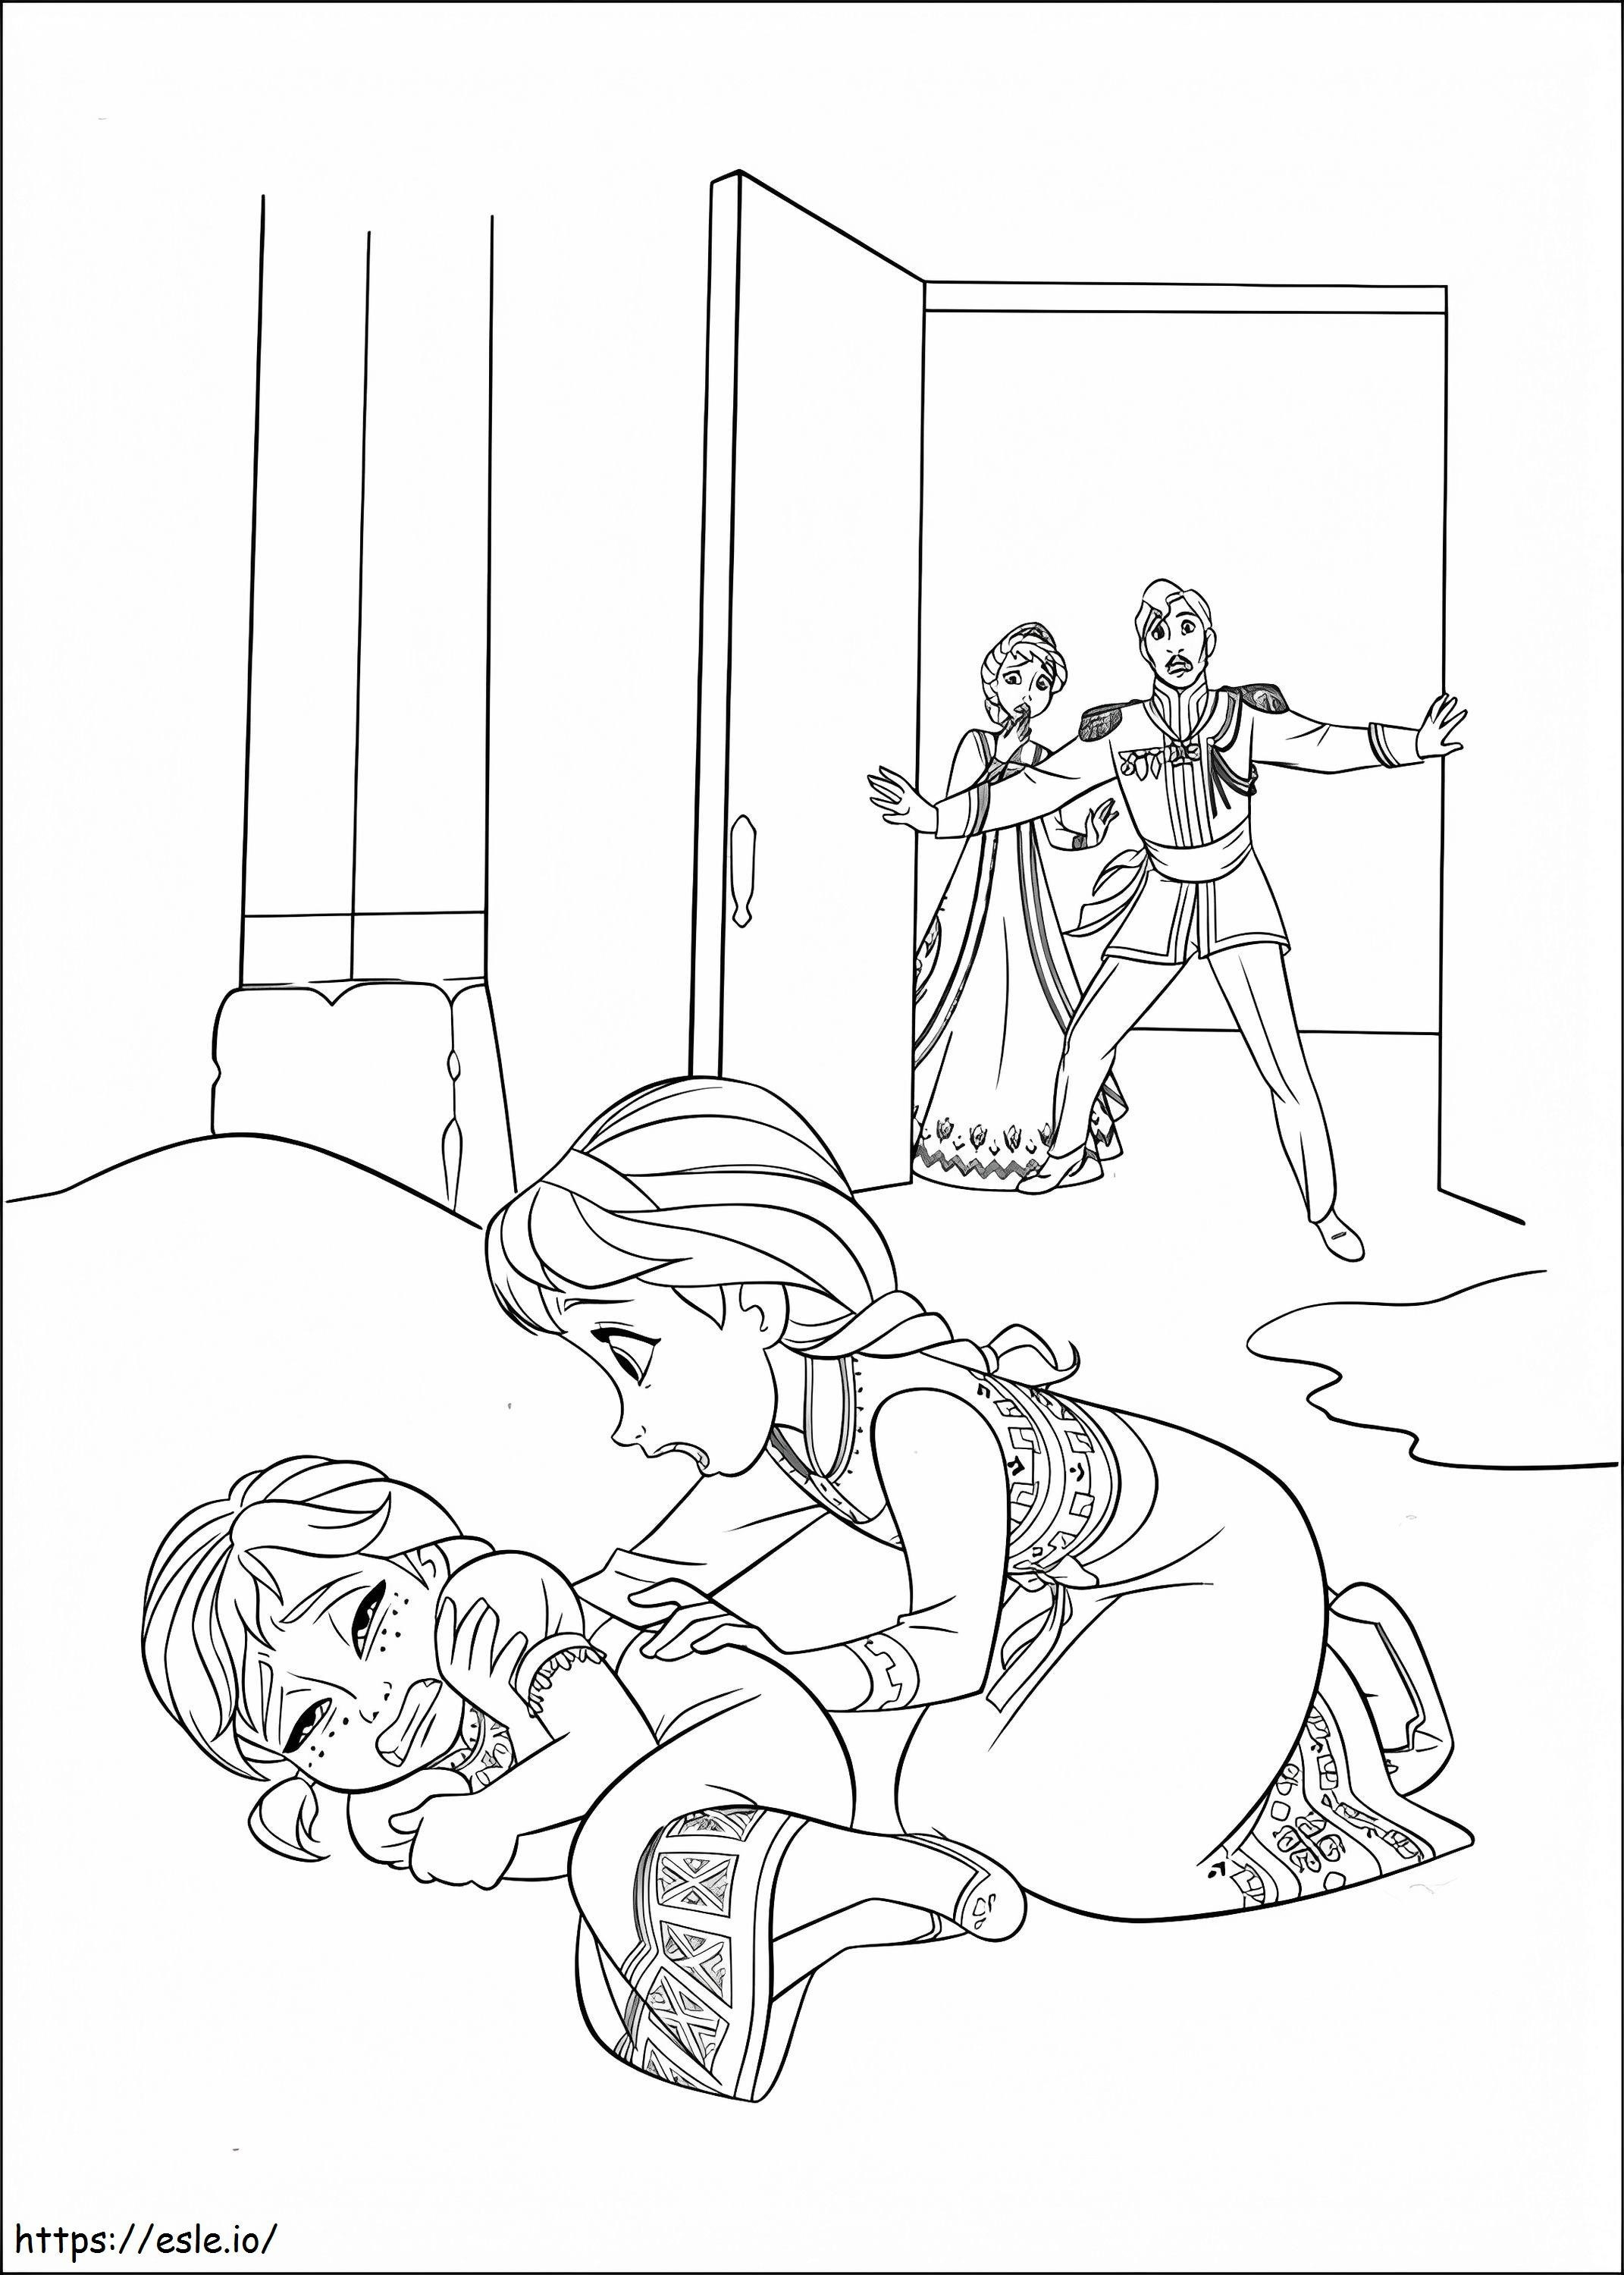 1534301402 Anna Crying A4 coloring page